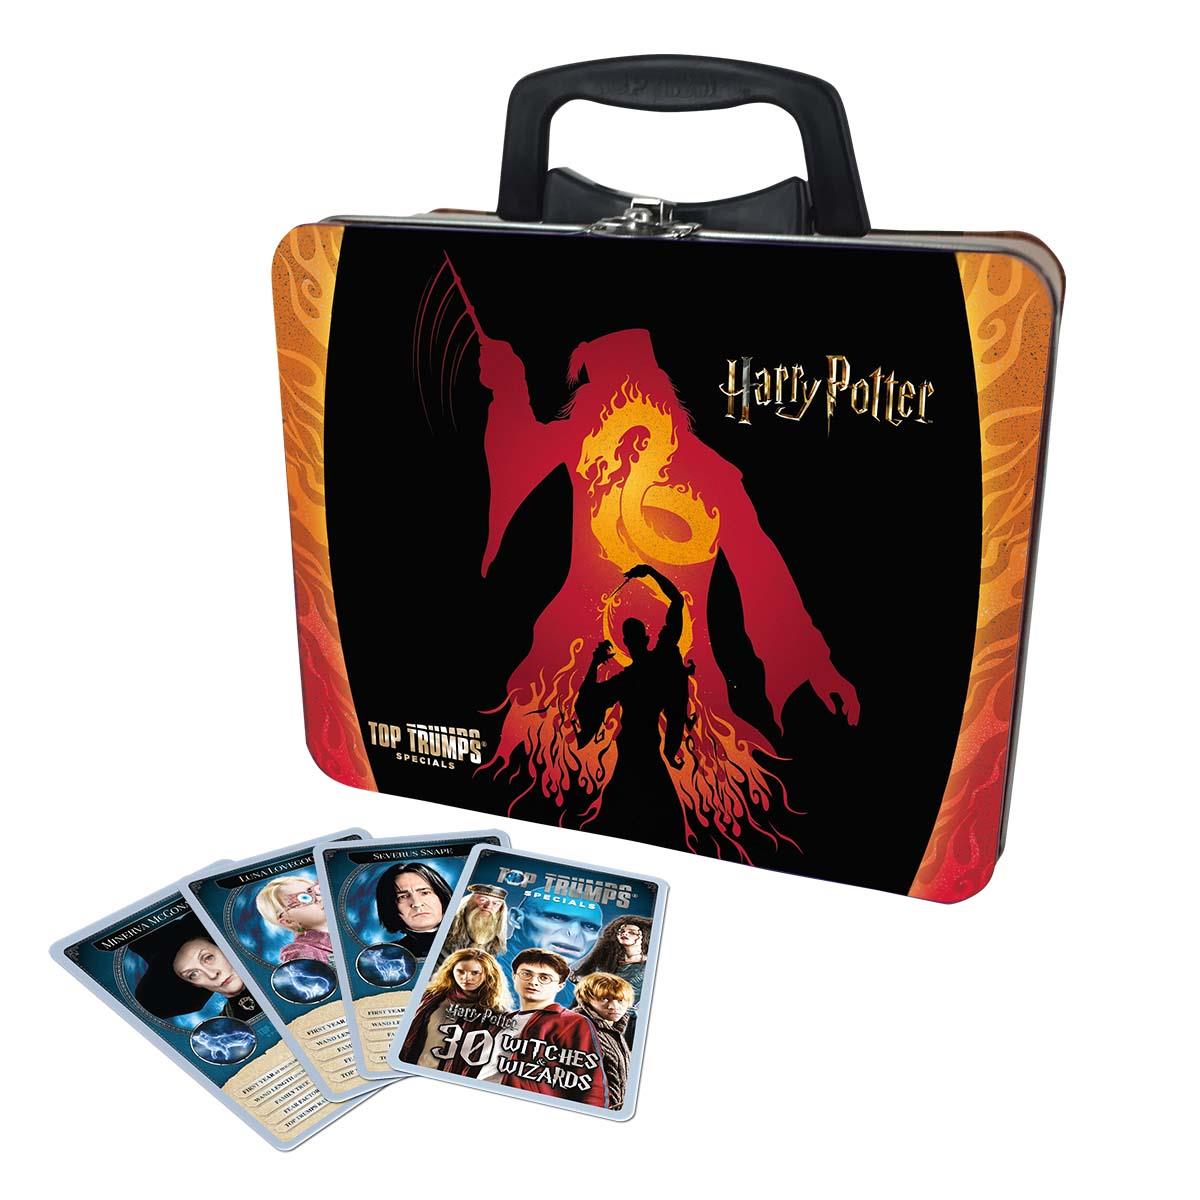 Harry Potter 30 Witches & Wizards Card Game Collectors Tin